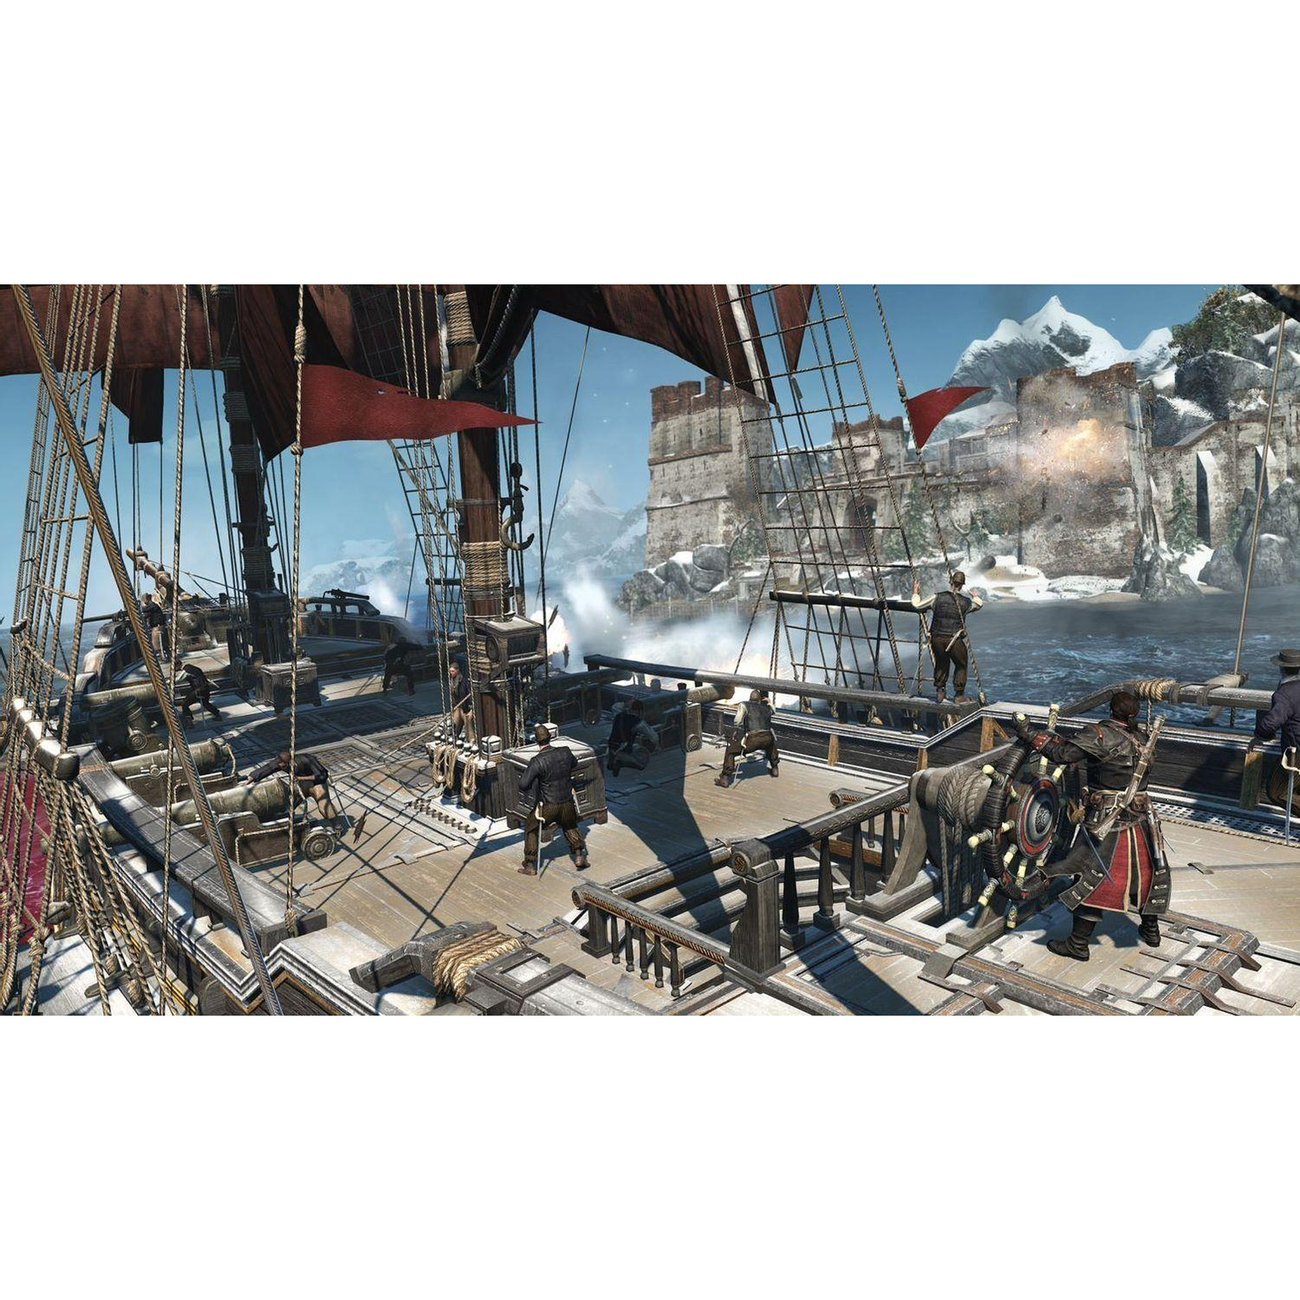 Игра Assassin's Creed Rogue Remastered (PS4)